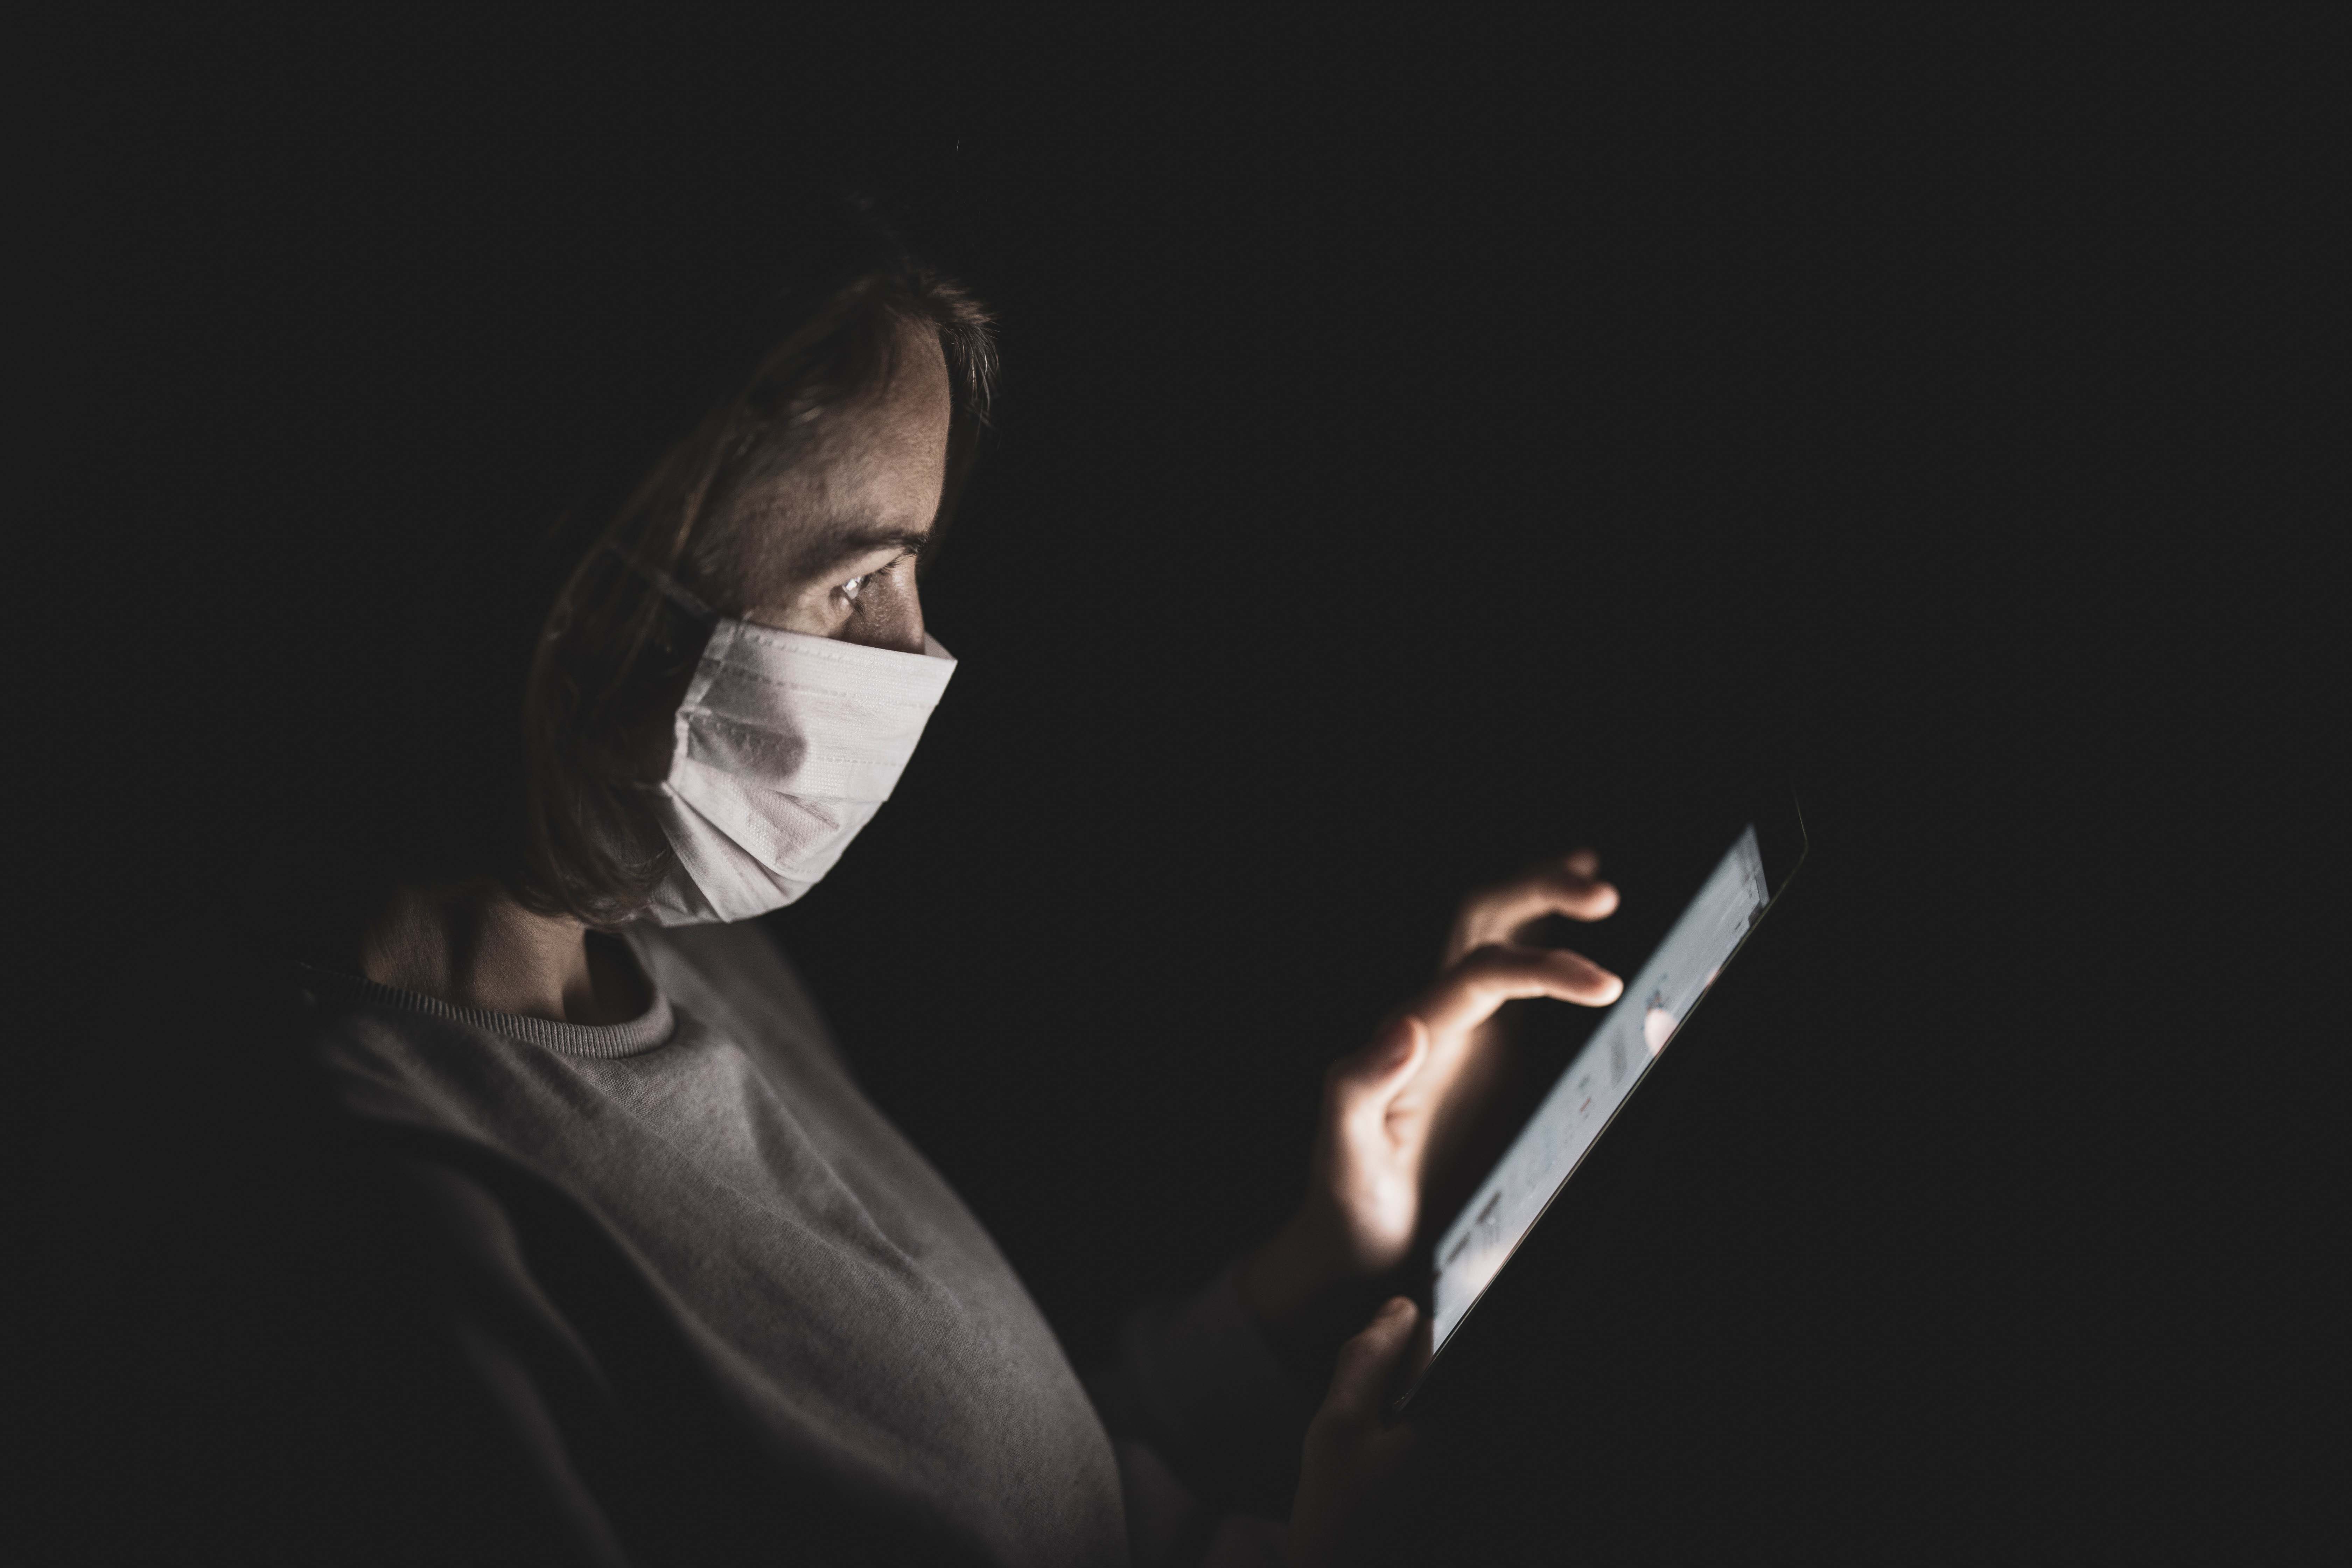 Woman wearing a face mask for protection from coronavirus. She is sitting in the dark, illuminated from the light of a tablet that she is working on.